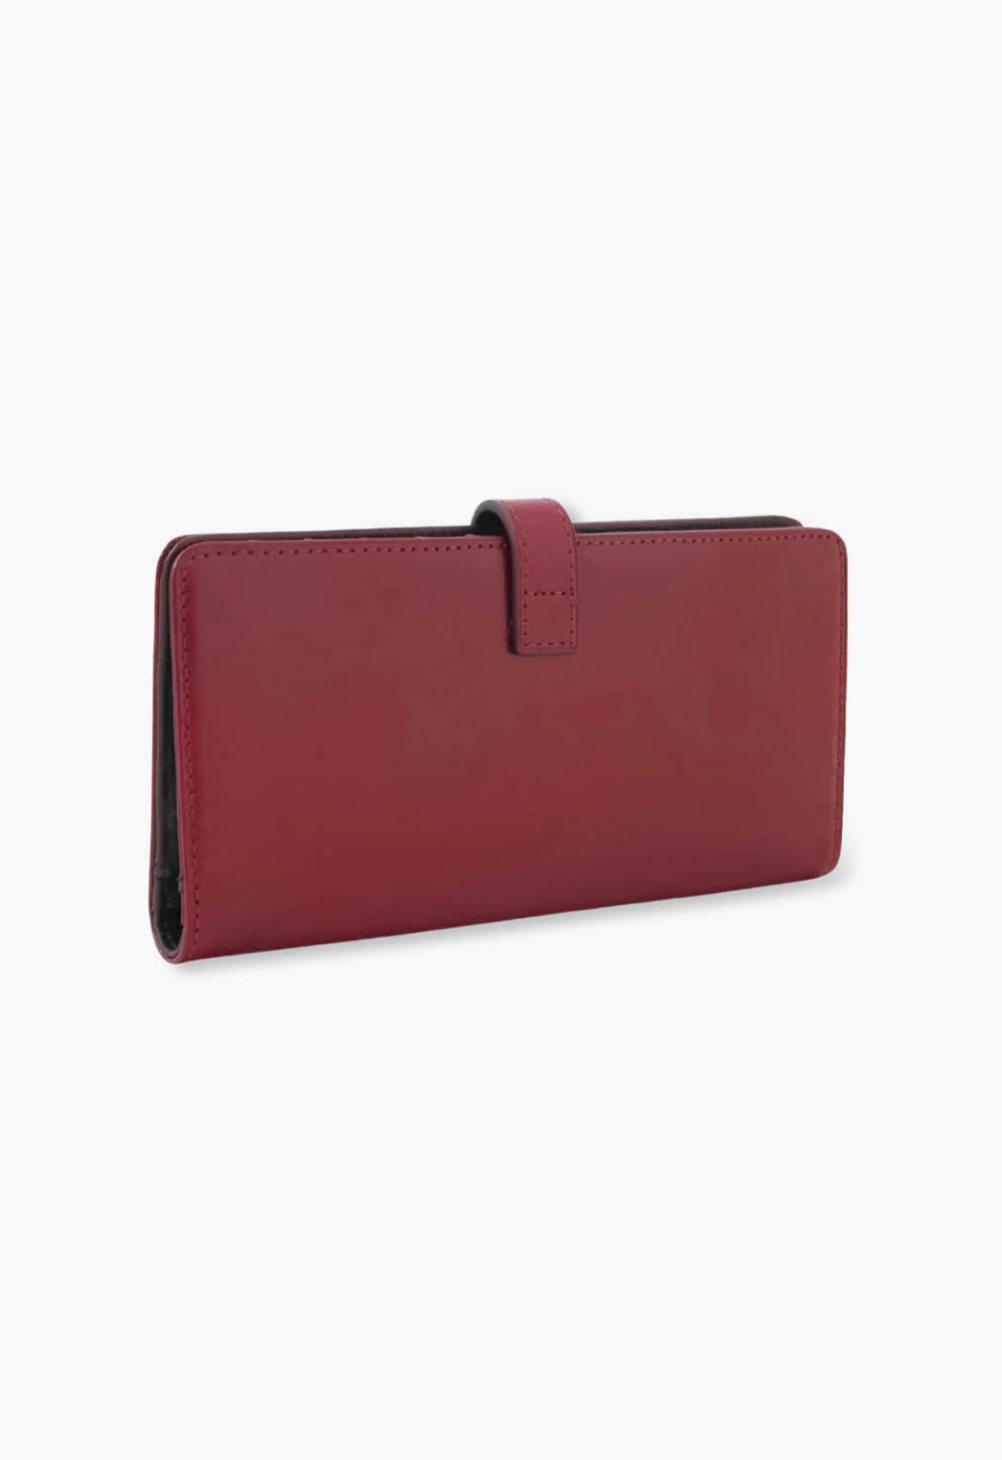 The Roger Wallet wine, in a rectangular shape, flap across the top to close it